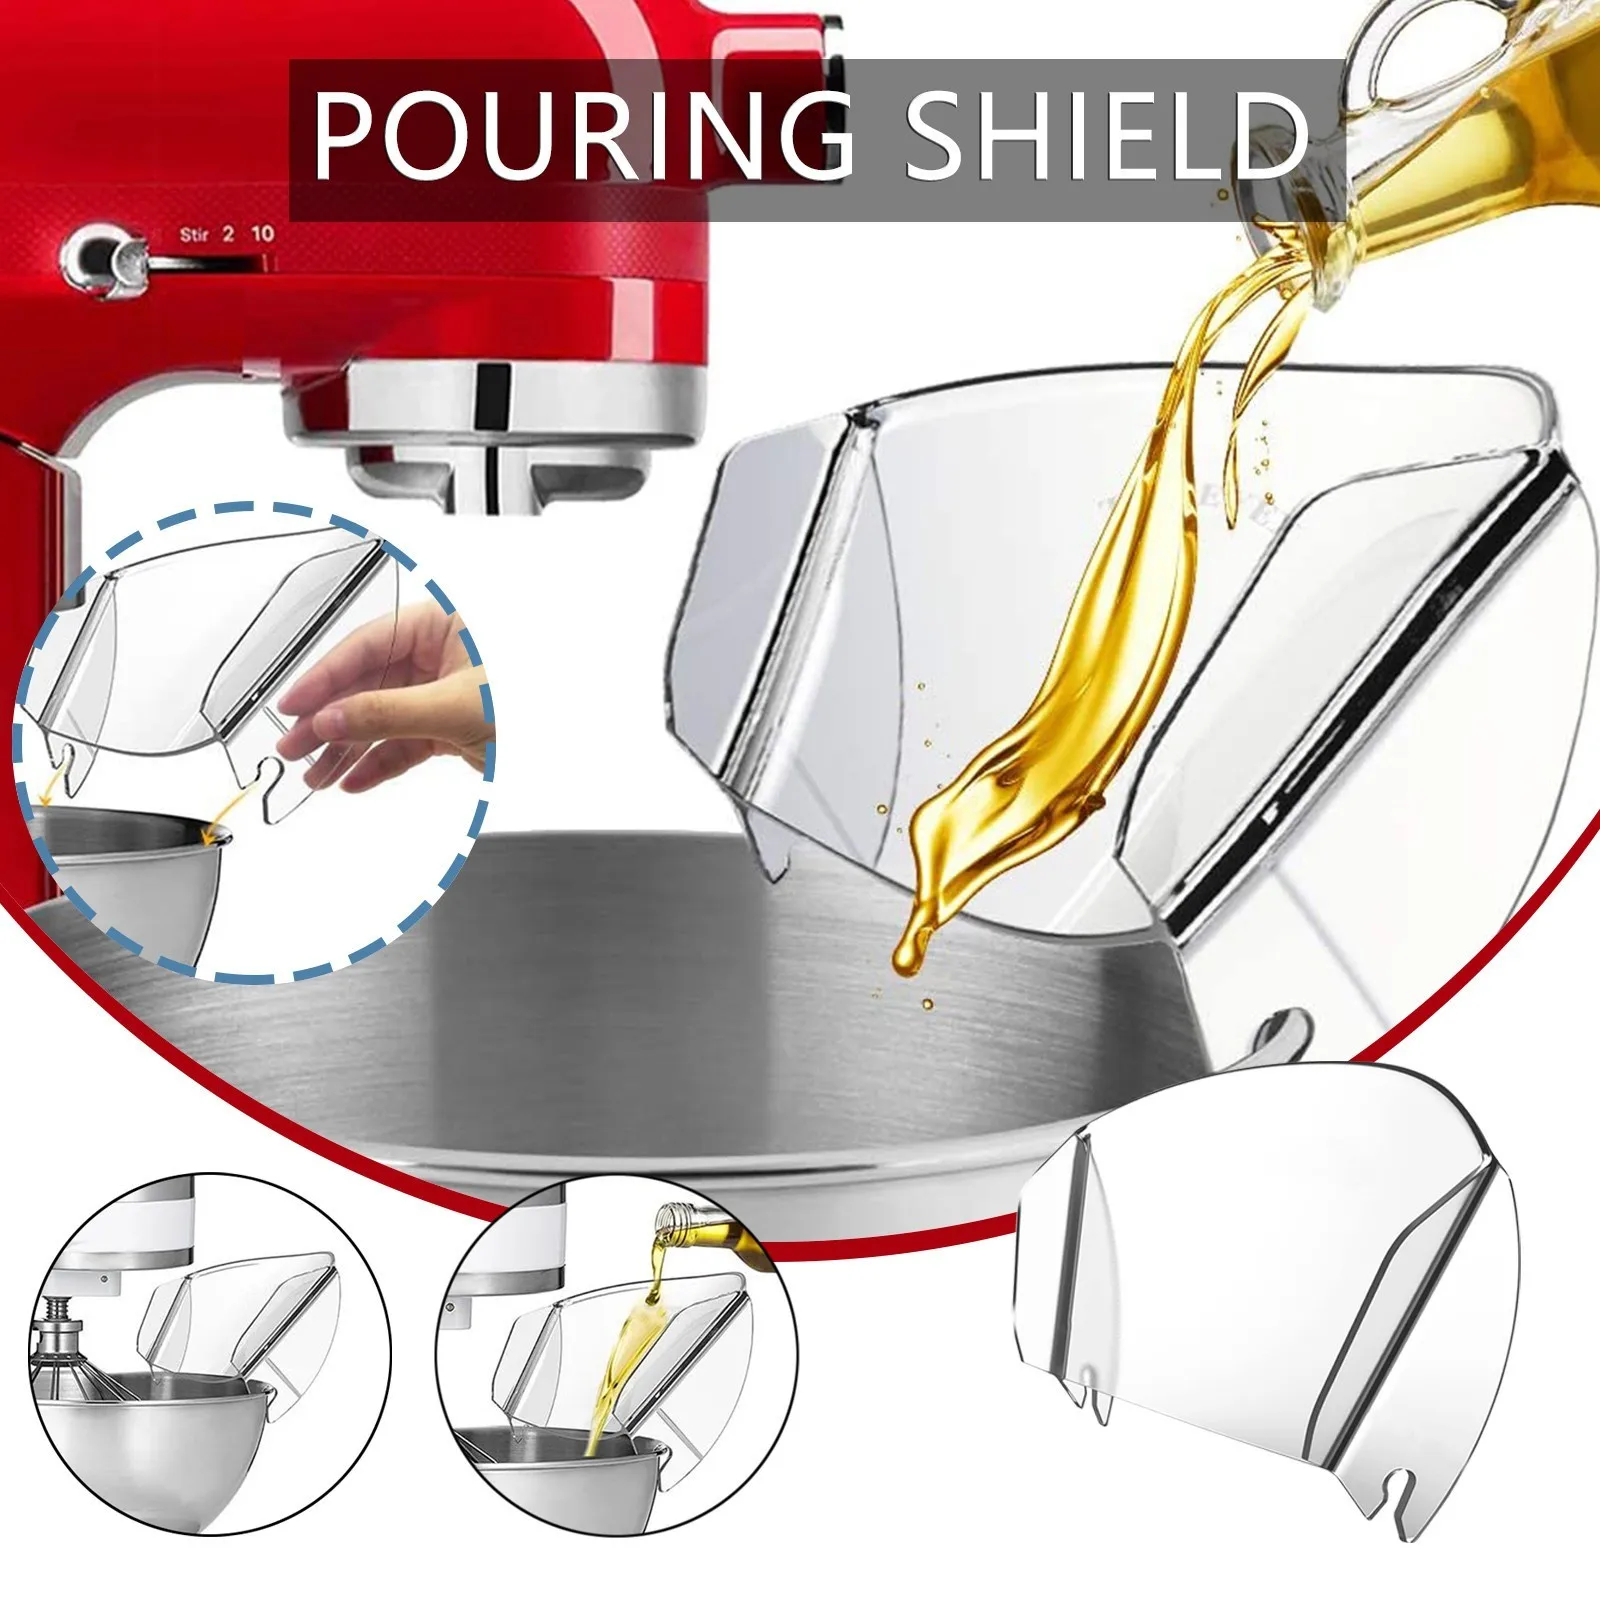 Pouring Shield Chute Universal Pouring Shield Mixing Bowl Splash Guard for Stand Mixer 